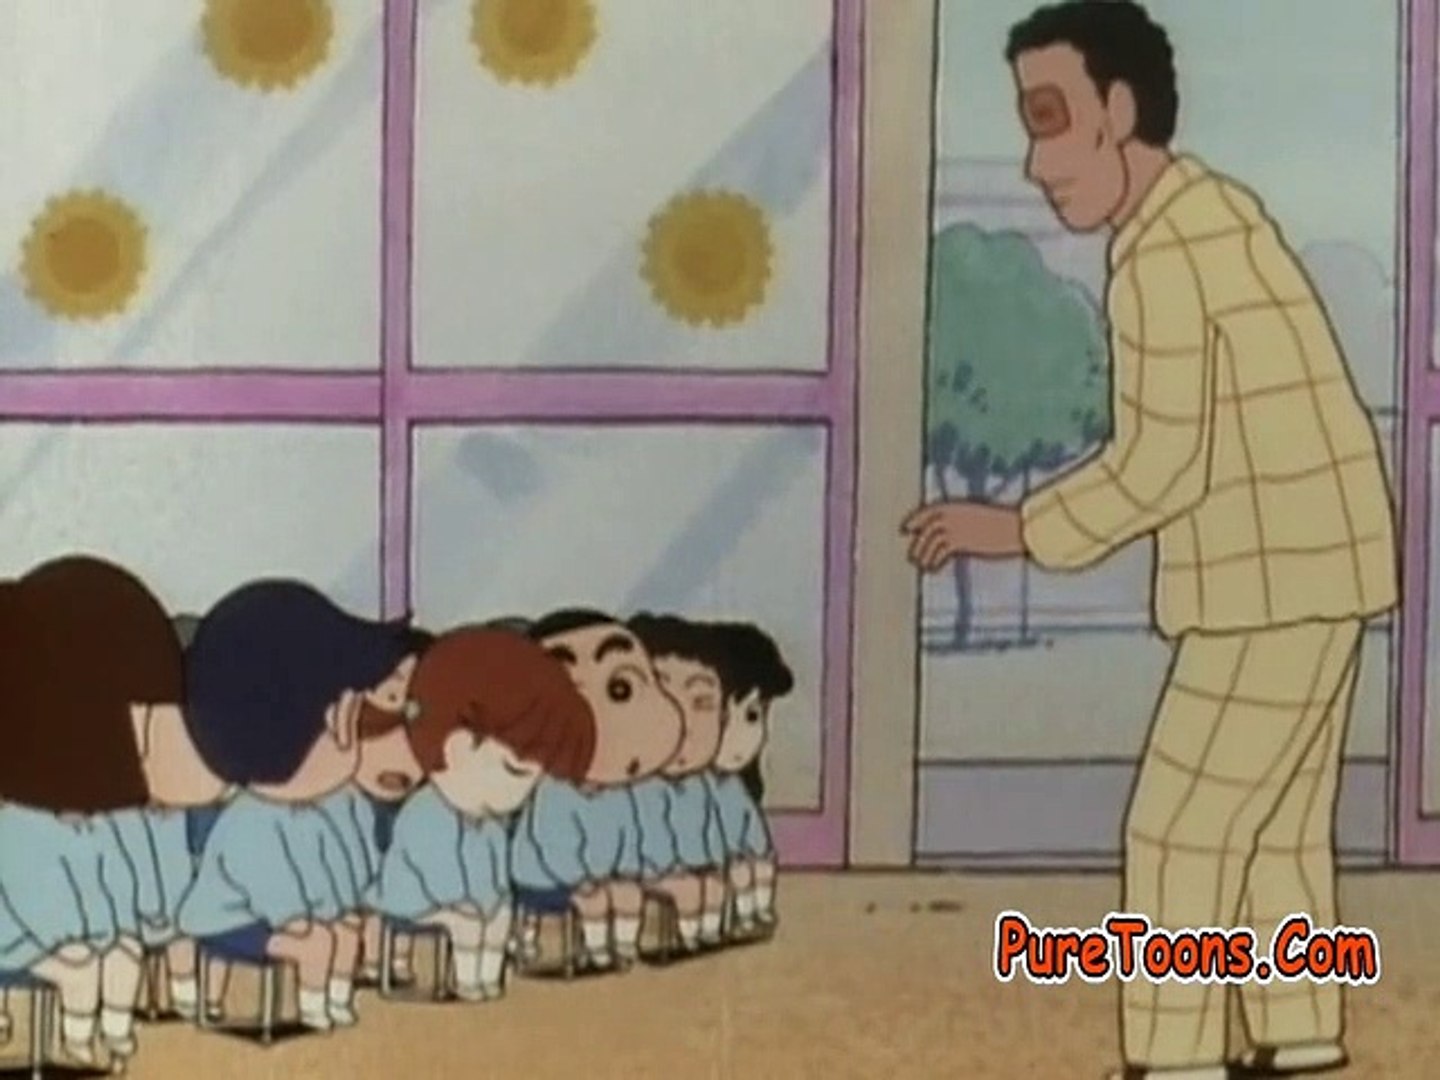 ShinChan -S1E04 | Episode 04 – The Sunflower Class Gang / Going on a Picnic  (Part 1) / Going on a Picnic (Part 2) | Shinchan Old Episodes In hind/Urdu  | Toon's Tv. - video Dailymotion